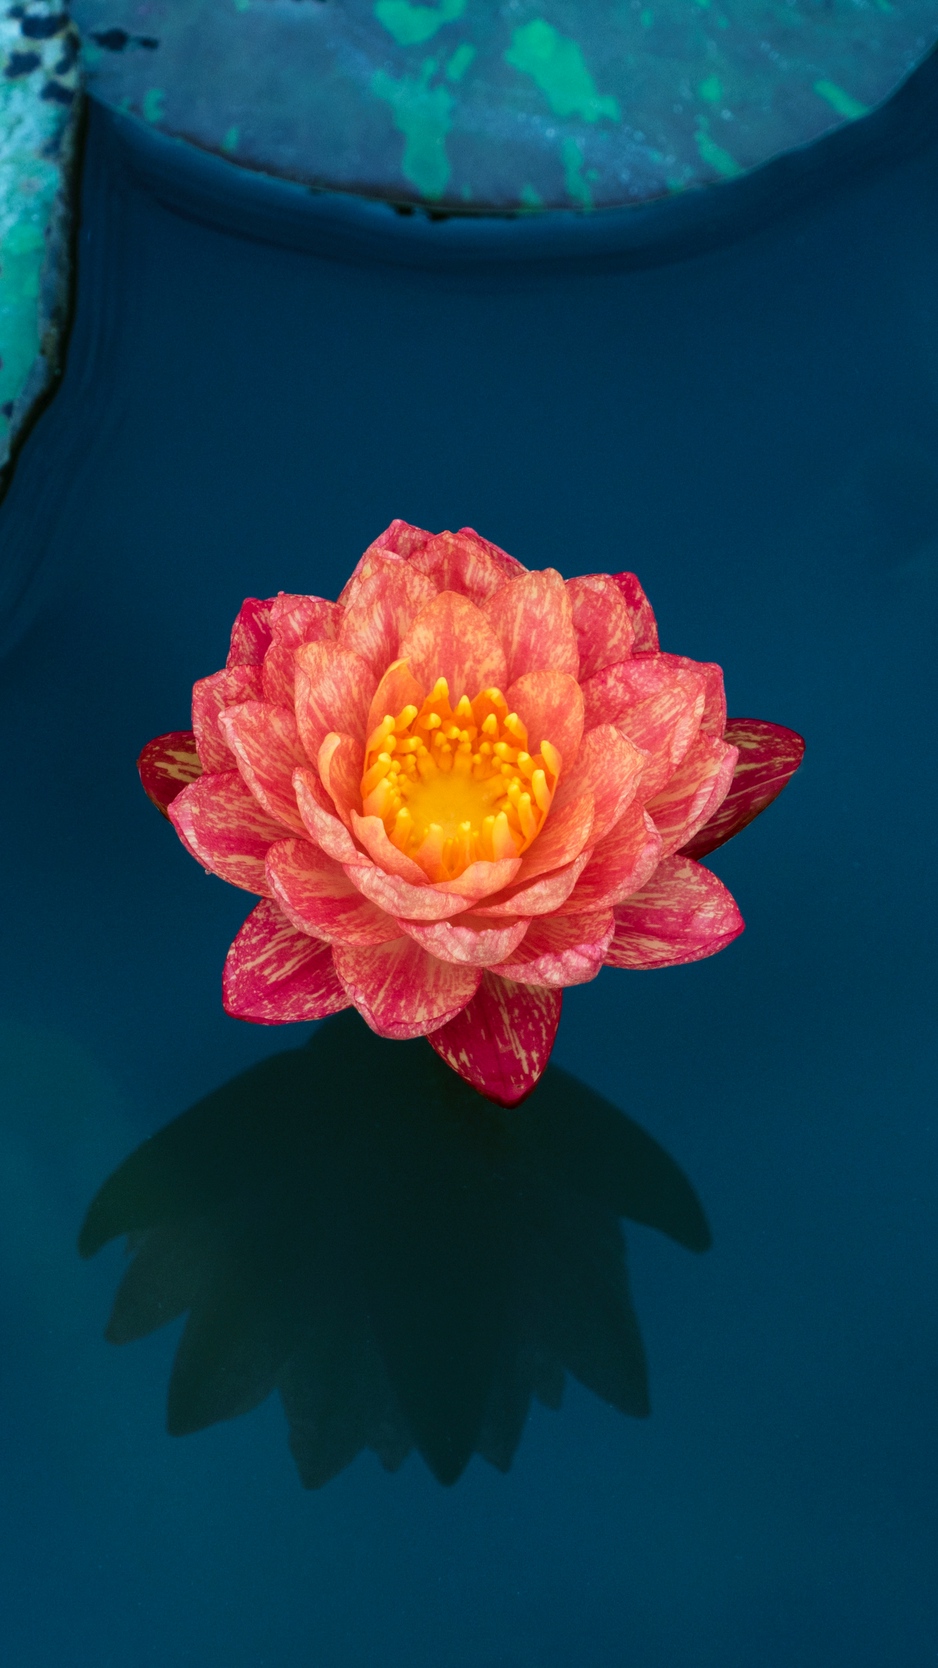 Wallpaper Lotus, Water Lily, Water, Petals, Leaves - Iphone Water Lily  Background - 938x1668 Wallpaper 